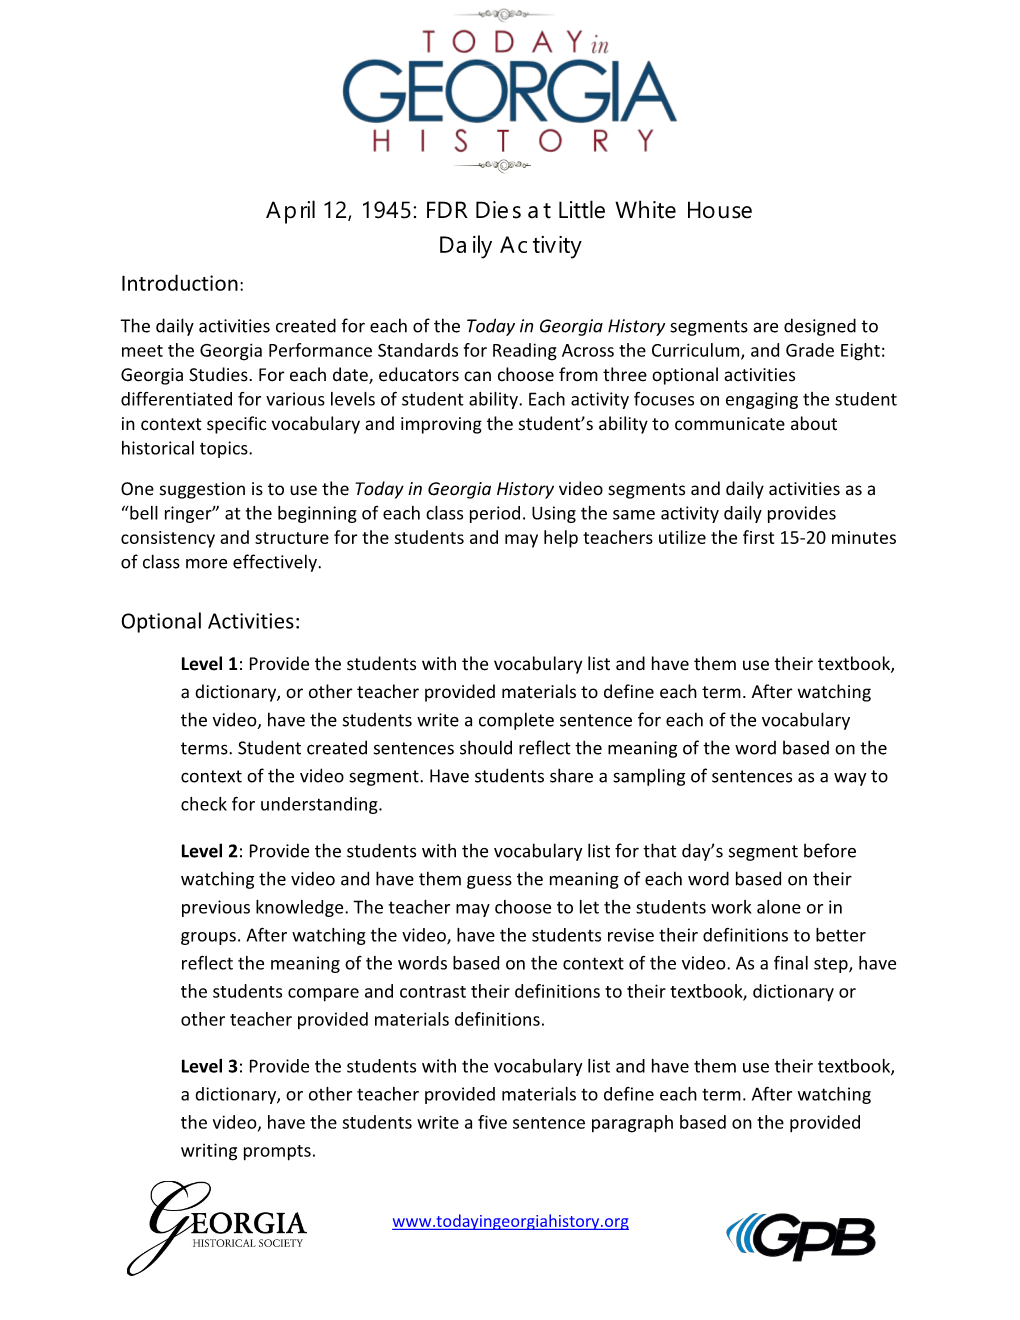 April 12, 1945: FDR Dies at Little White House Daily Activity